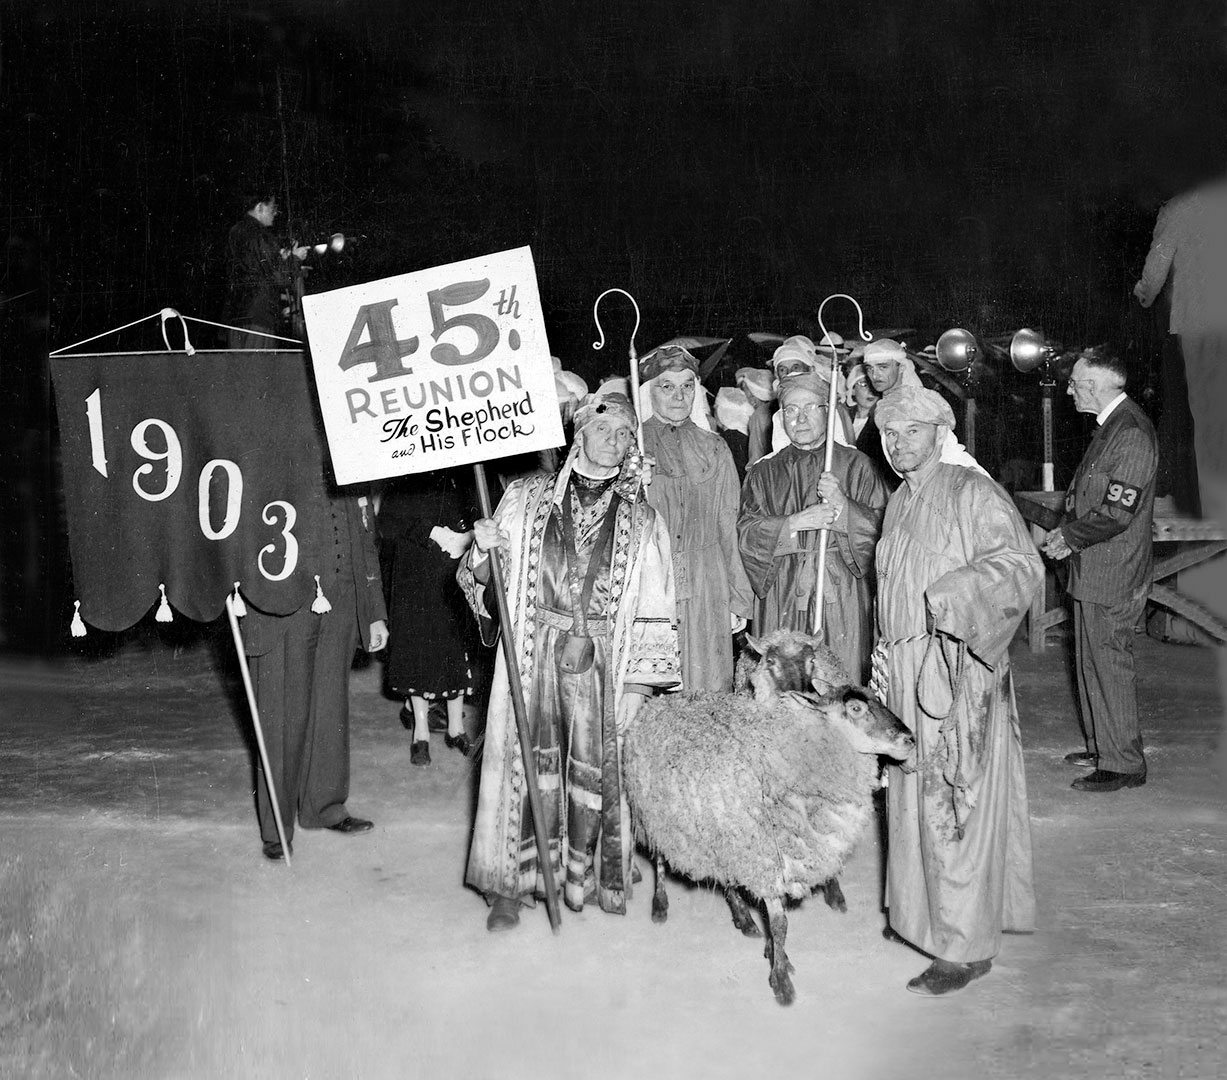 In 1948, this “display of livestock” won 
best costume for the Class of 1903. The sign holder, Class President Alexander Maerz, is next to classmates George Ramsdell, a longtime Bates math professor, and Carl Sawyer. Ralph Johnson, right, wrangled the sheep for the class.
Photograph courtesy of the Edmund S. Muskie Archives 
and Special Collections Library